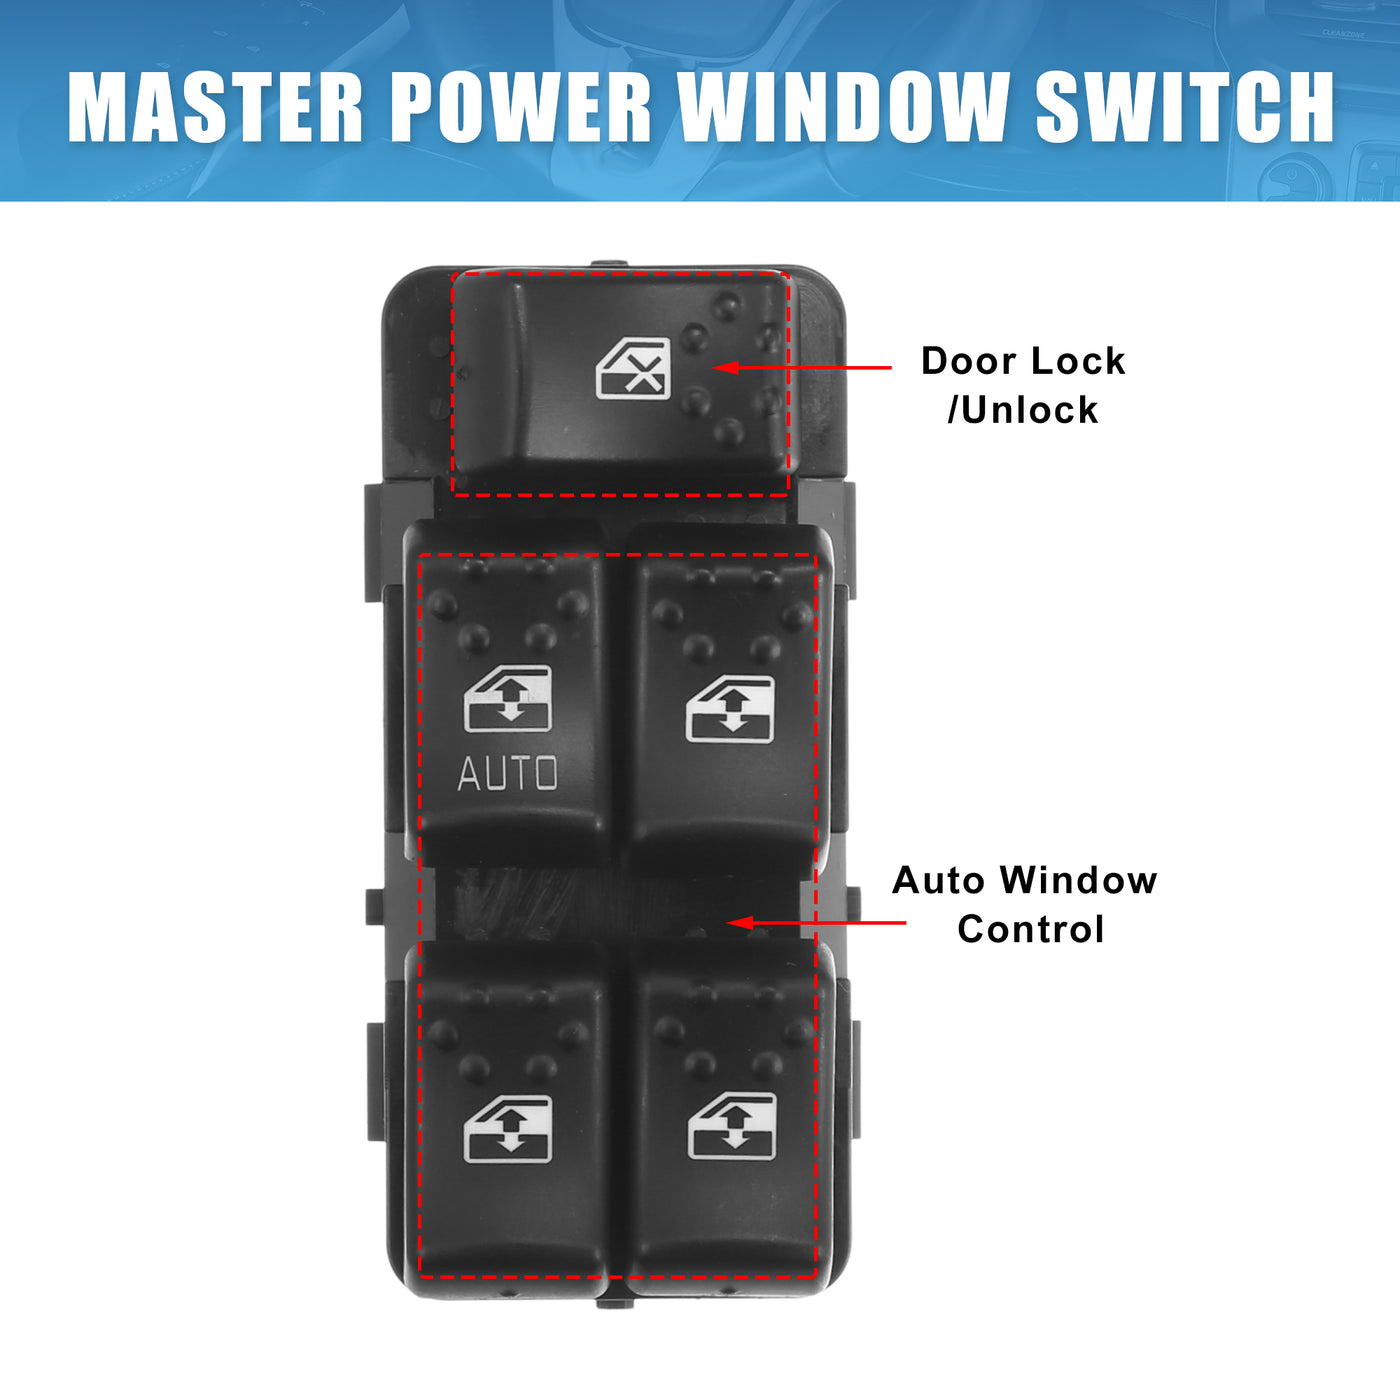 X AUTOHAUX 1 Set 22664398 Car Master Power Window Switch Front Driver Side for Saturn Ion 2003-2007